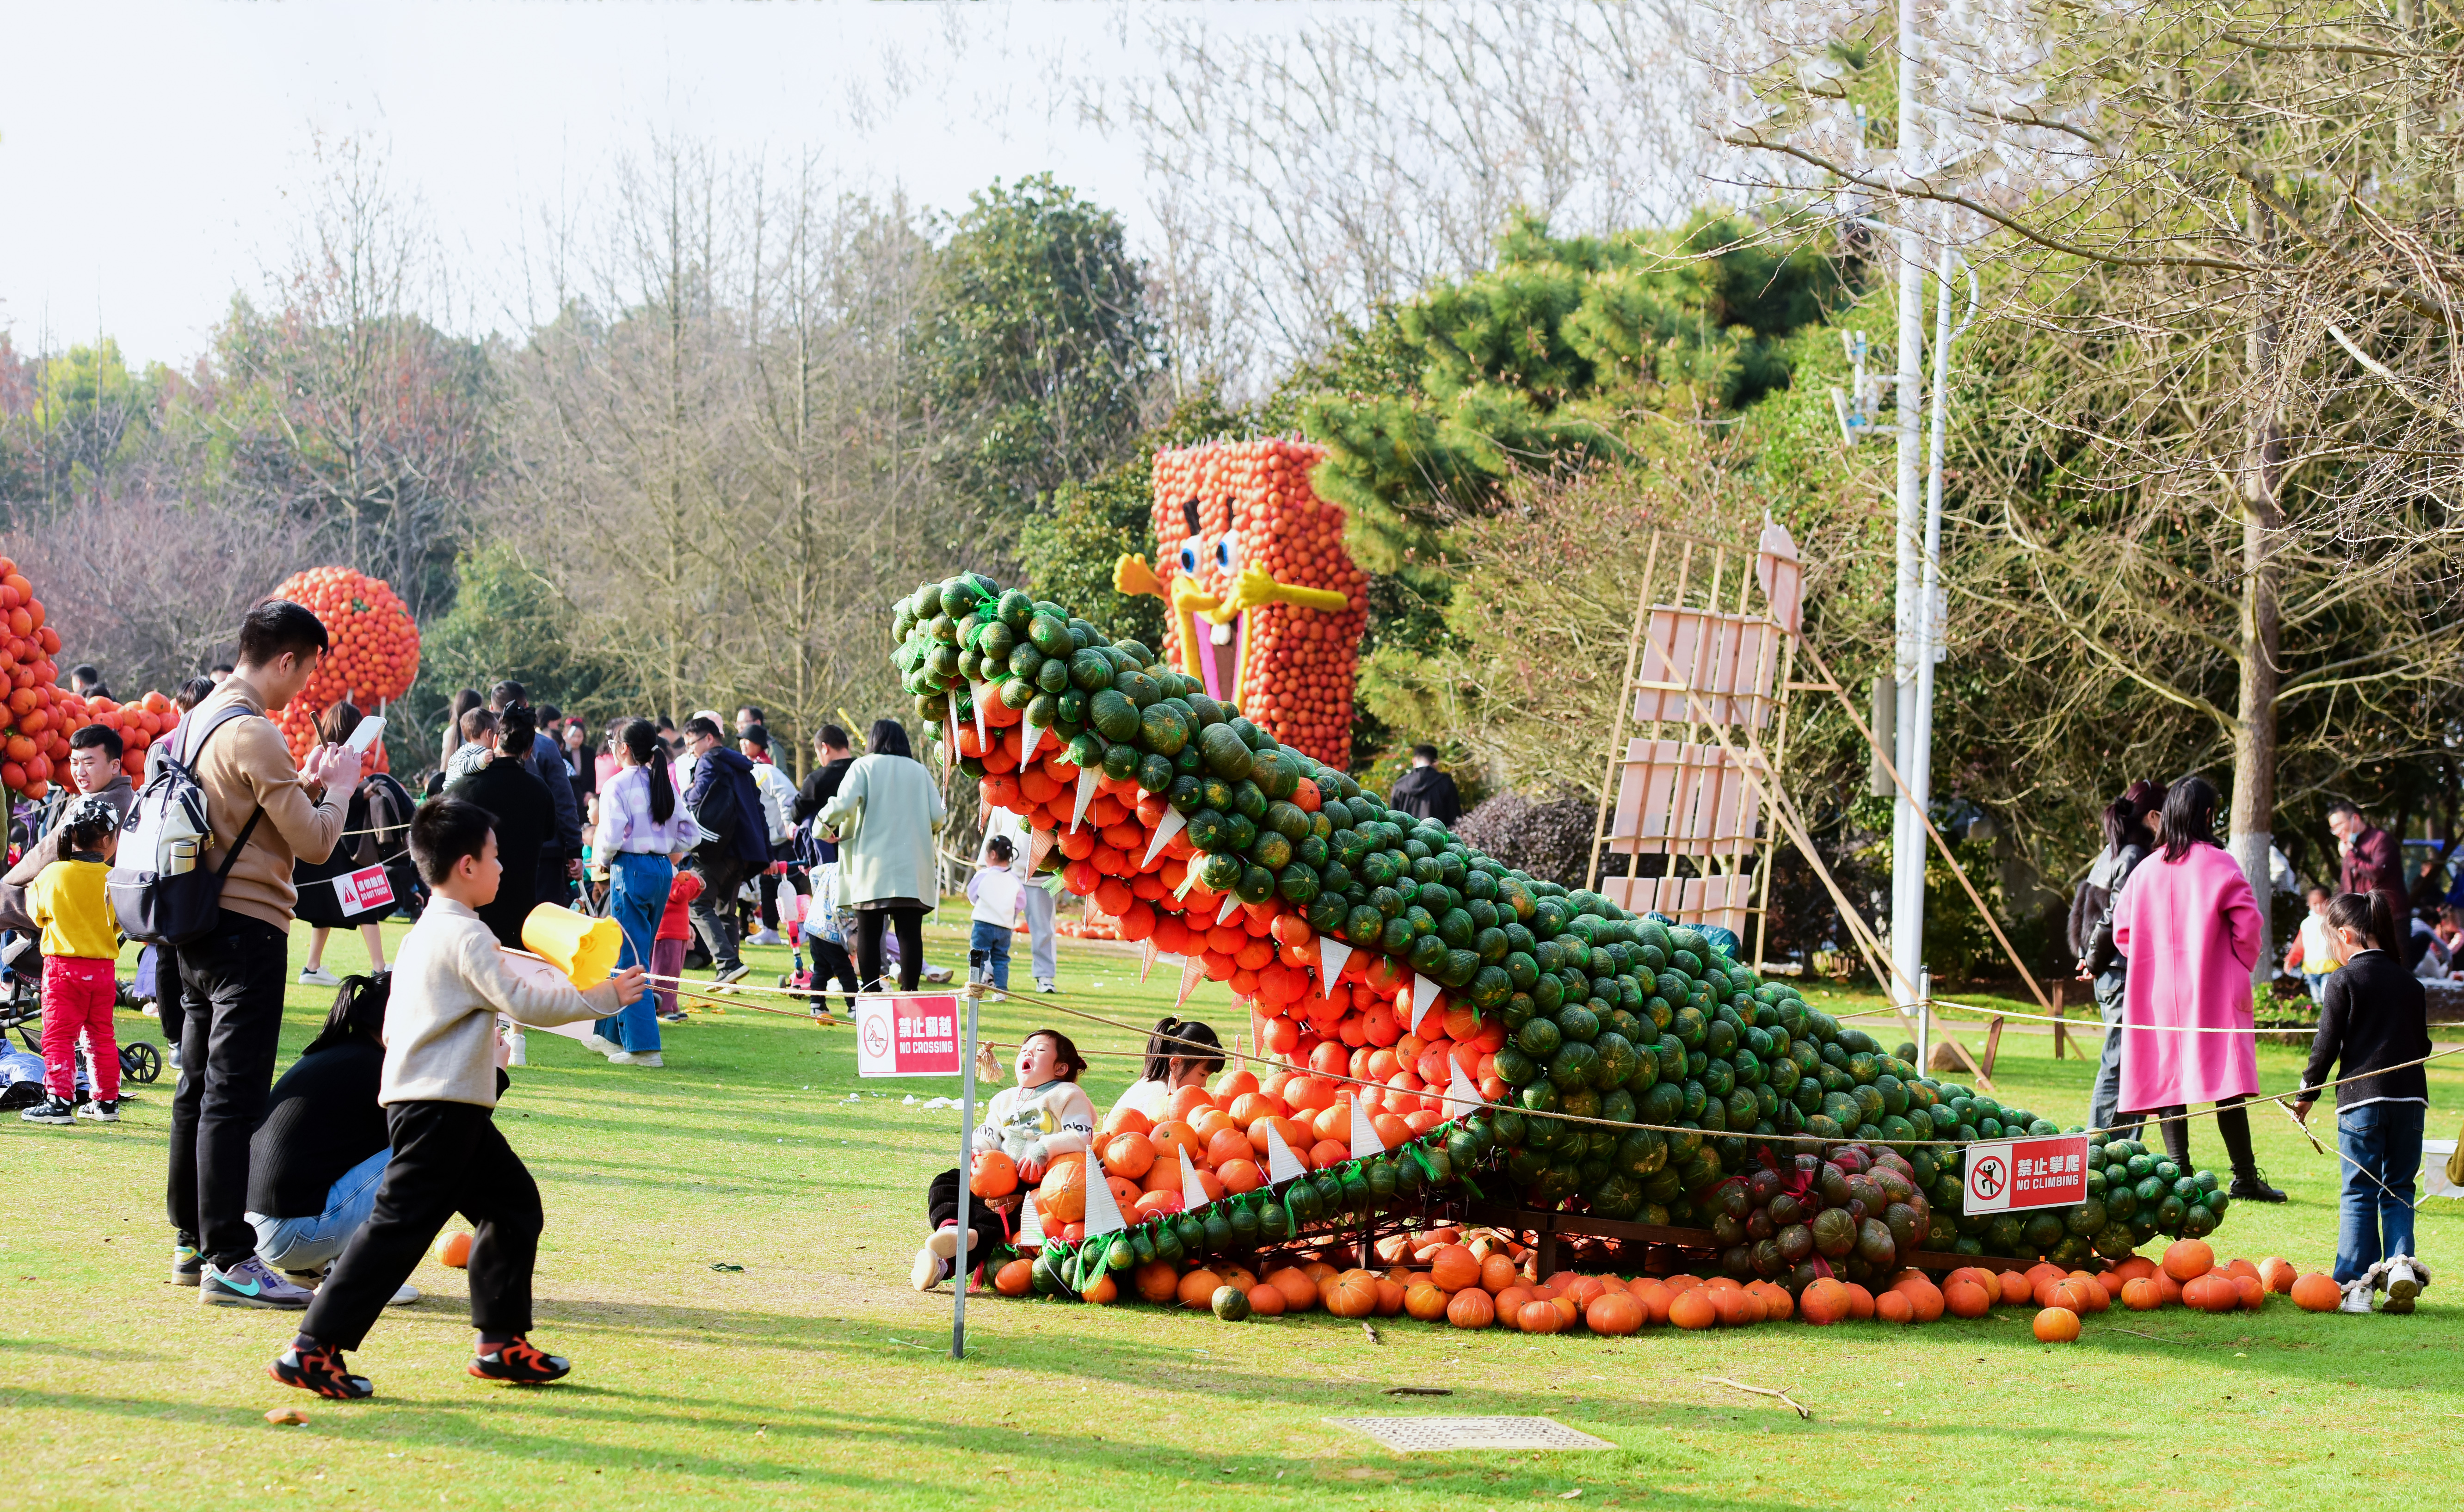 Children play in front of a crocodile assembled from pumpkins at an art festival held at the Fenghuanggou scenic spot in Nanchang, east China's Jiangxi Province on December 31, 2023. /IC